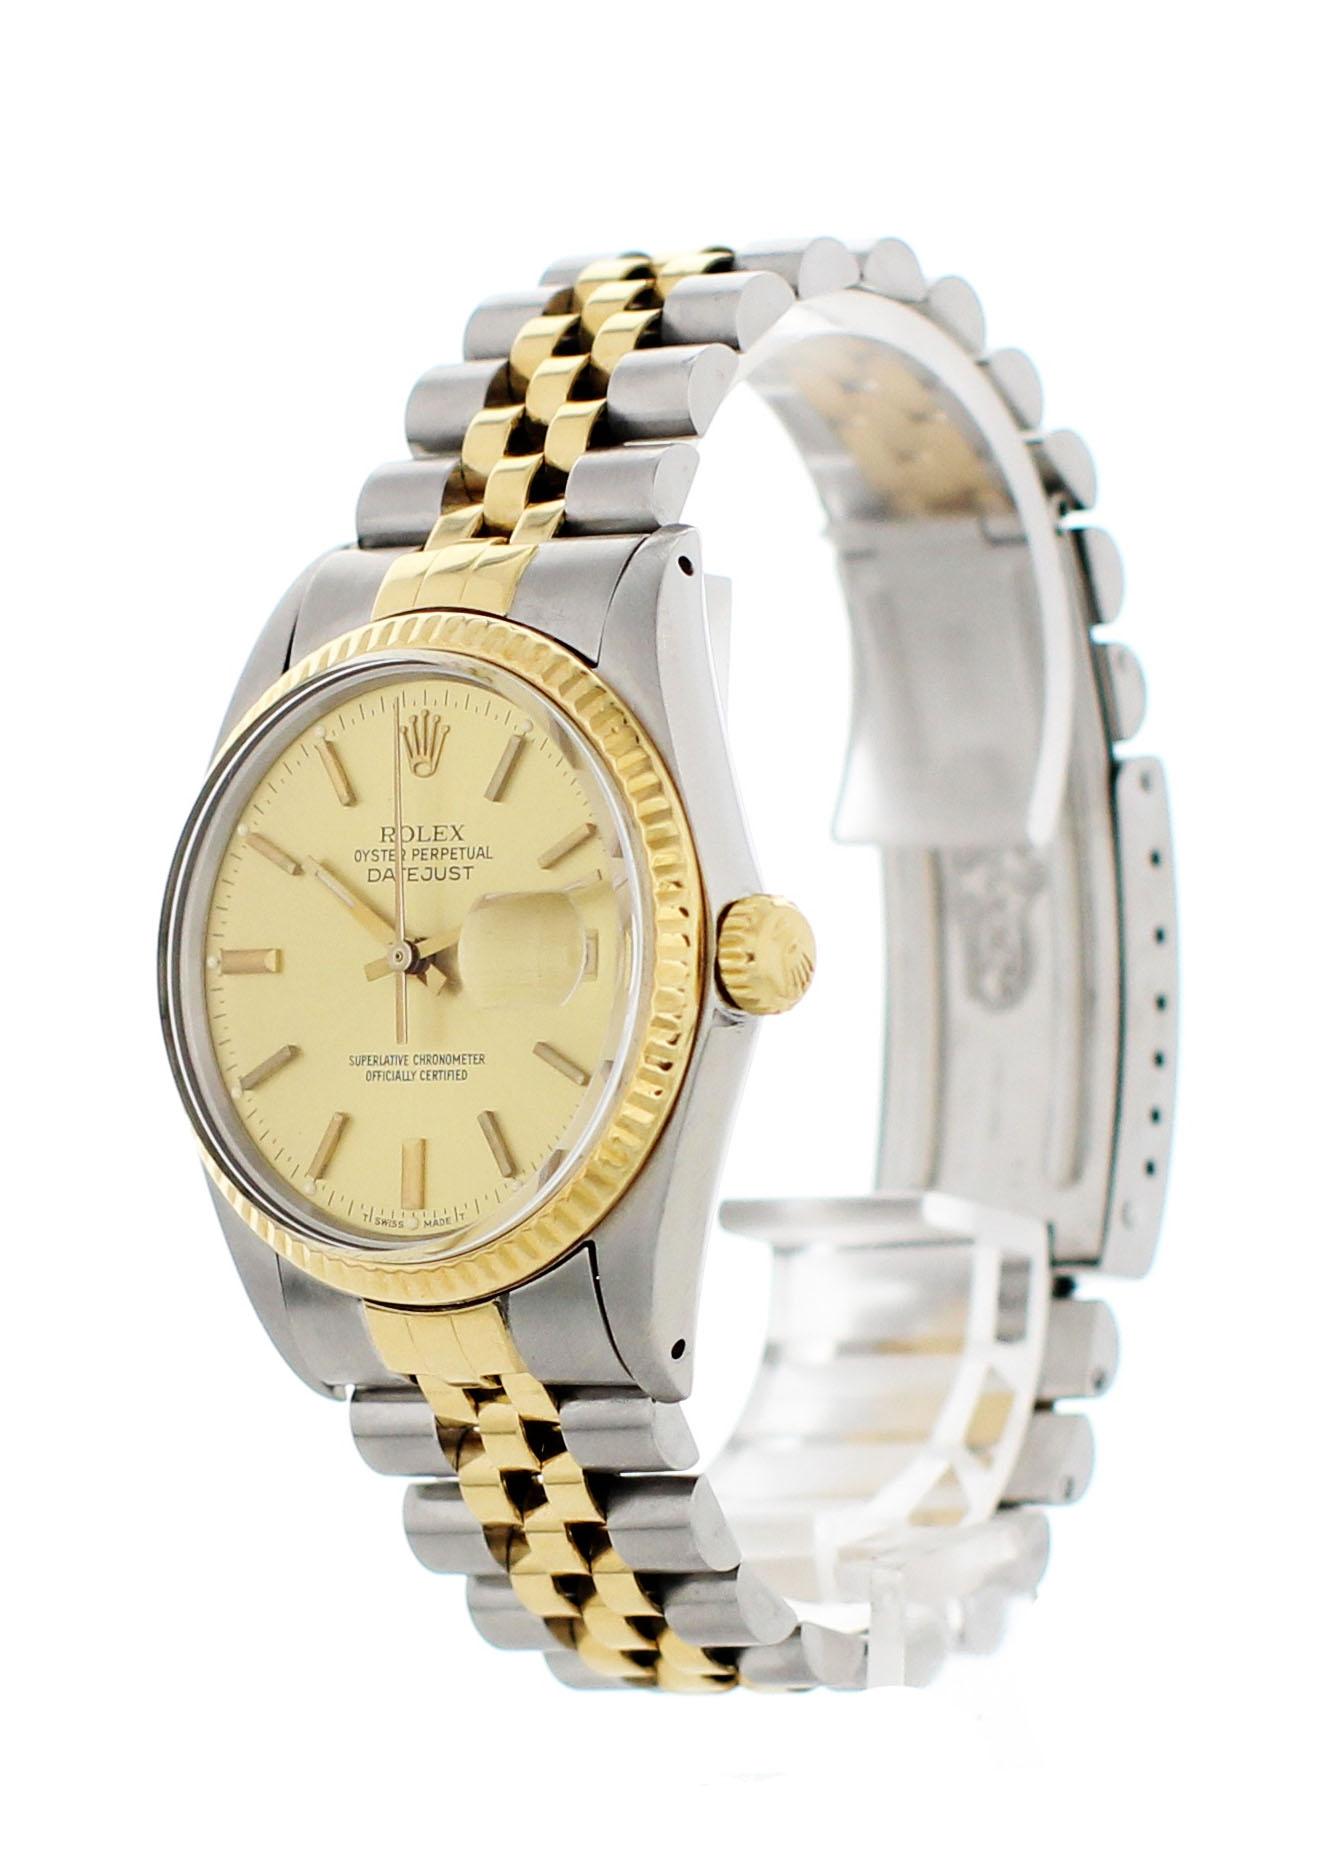 Rolex Oyster Perpetual Datejust 16013 Mens Watch. Stainless steel 36mm case with an 18k yellow gold fluted bezel. Gold dial with quickset date. Two-tone jubilee band with stainless steel fold-over clasp. Will fit up to an 8-inch wrist. Automatic